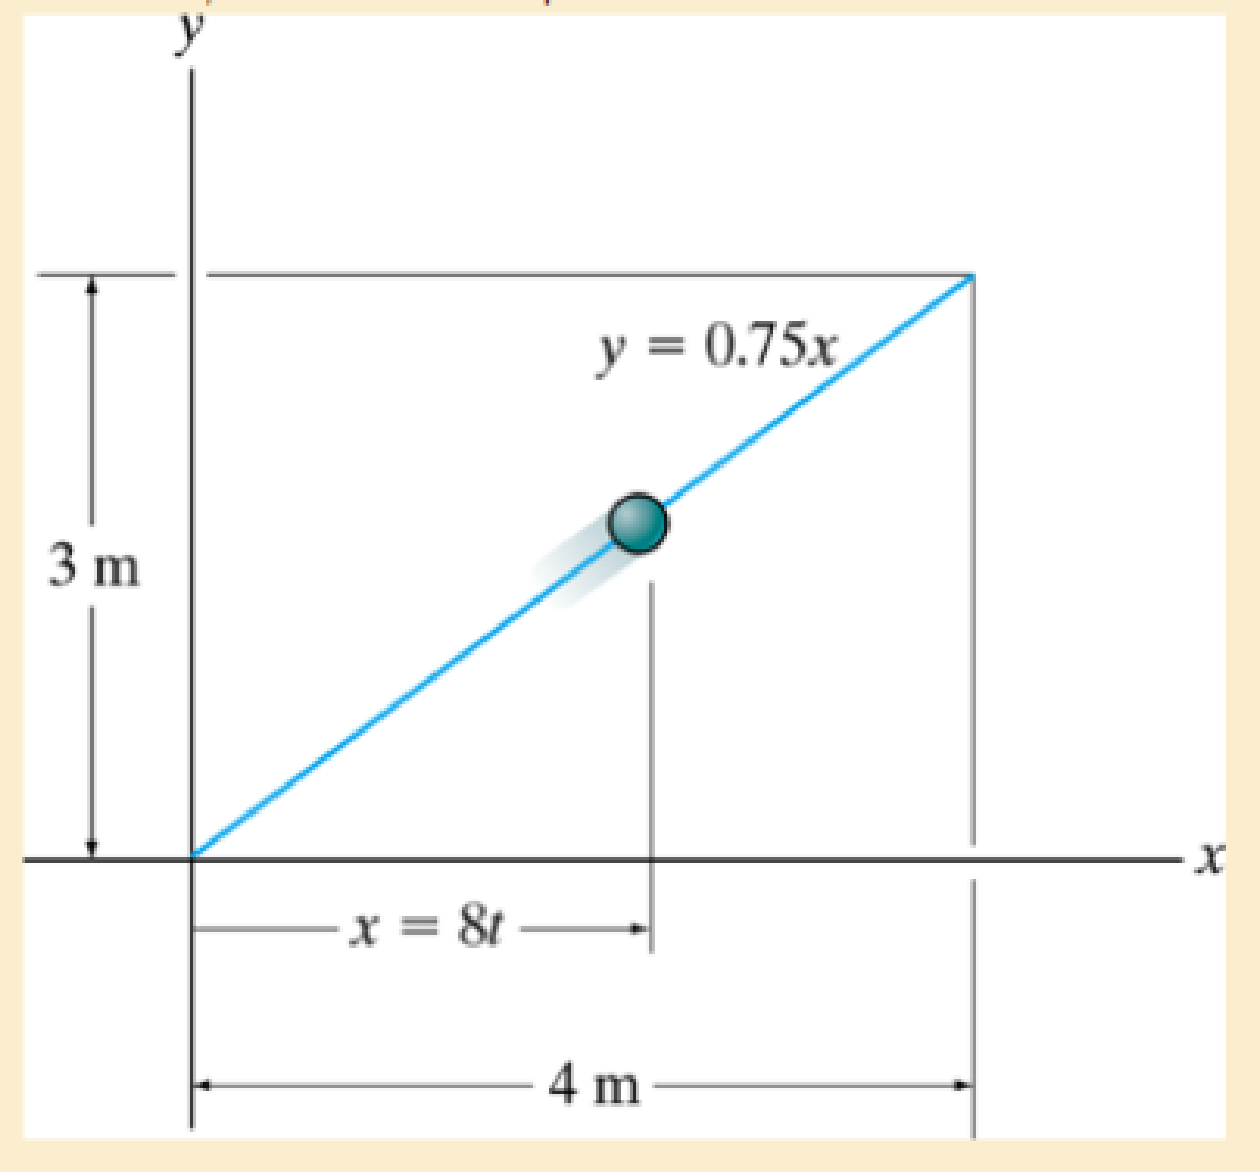 Chapter 12.6, Problem 16FP, If its position along the x axis is x = (8t) m, where t is in seconds, determine its speed when t = 